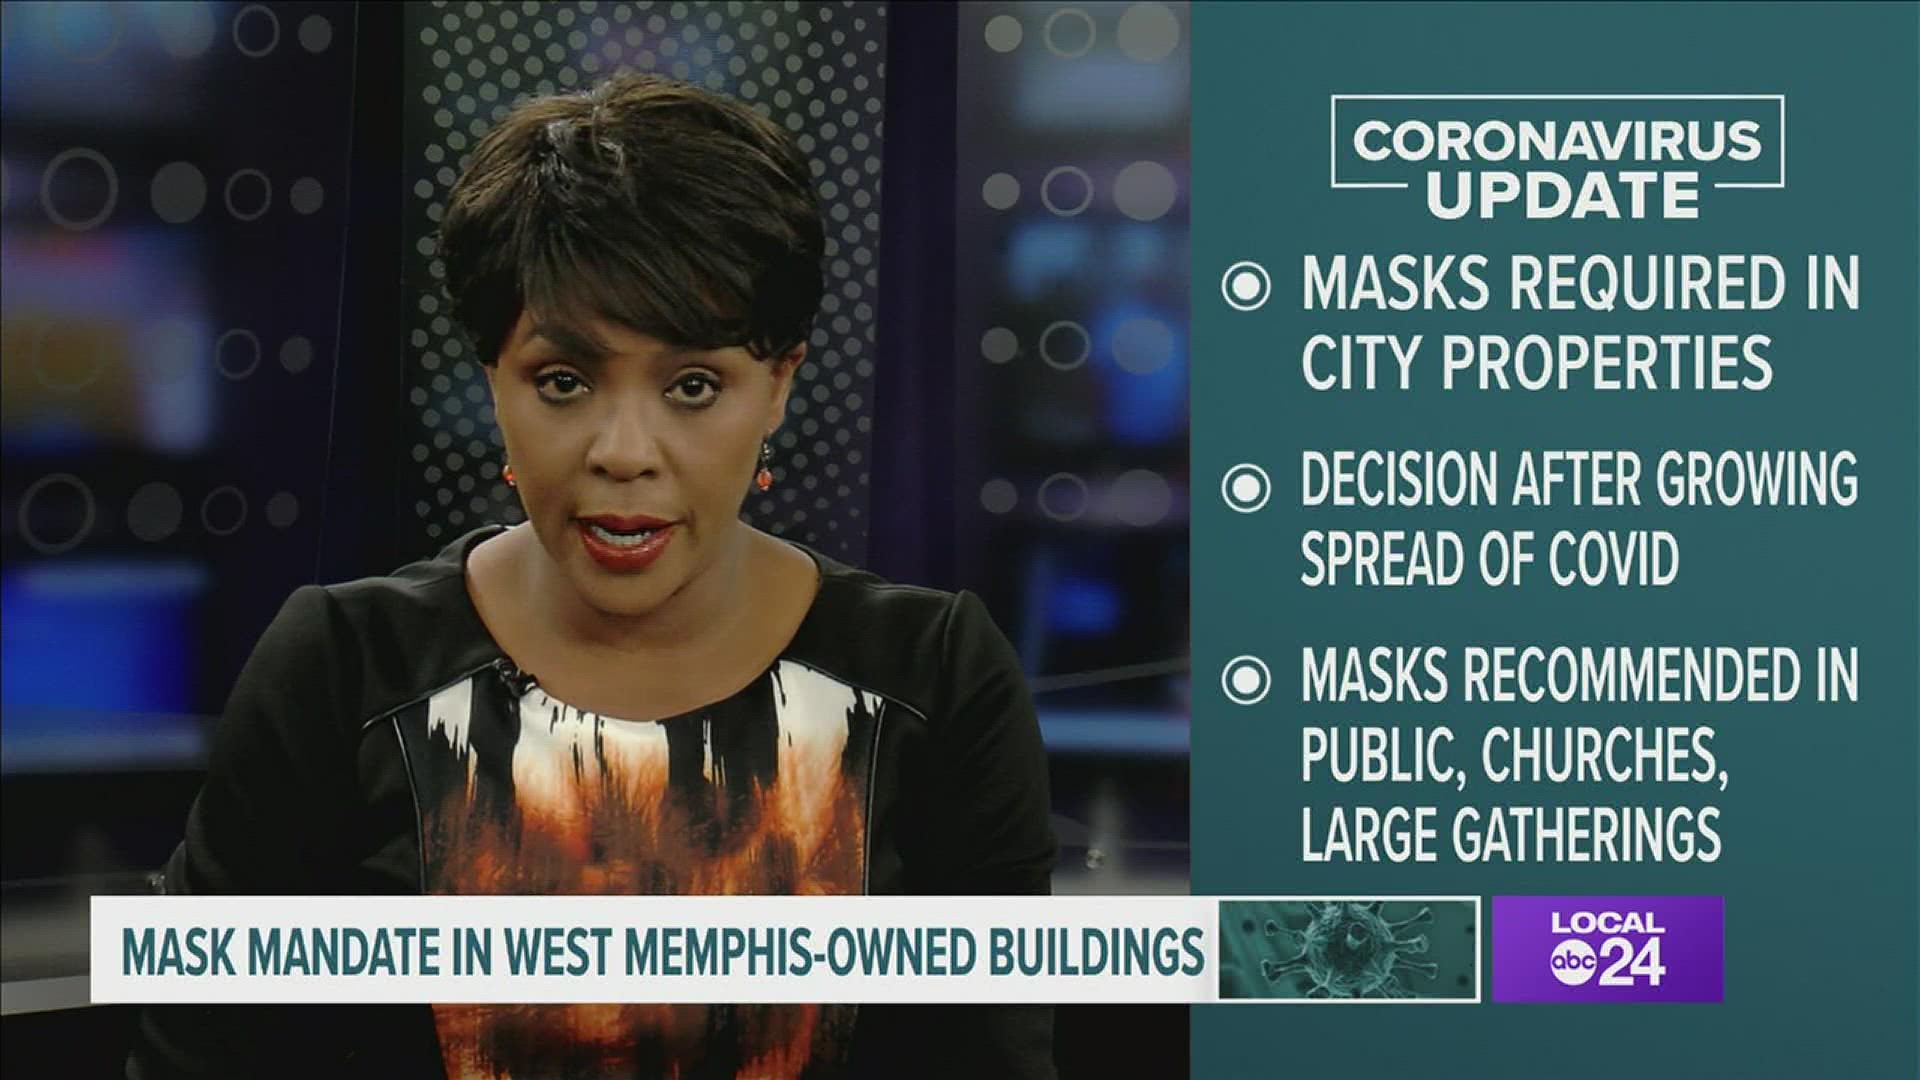 “I have decided to enact this emergency declaration requiring the use of masks on City-owned property,” said Mayor McClendon